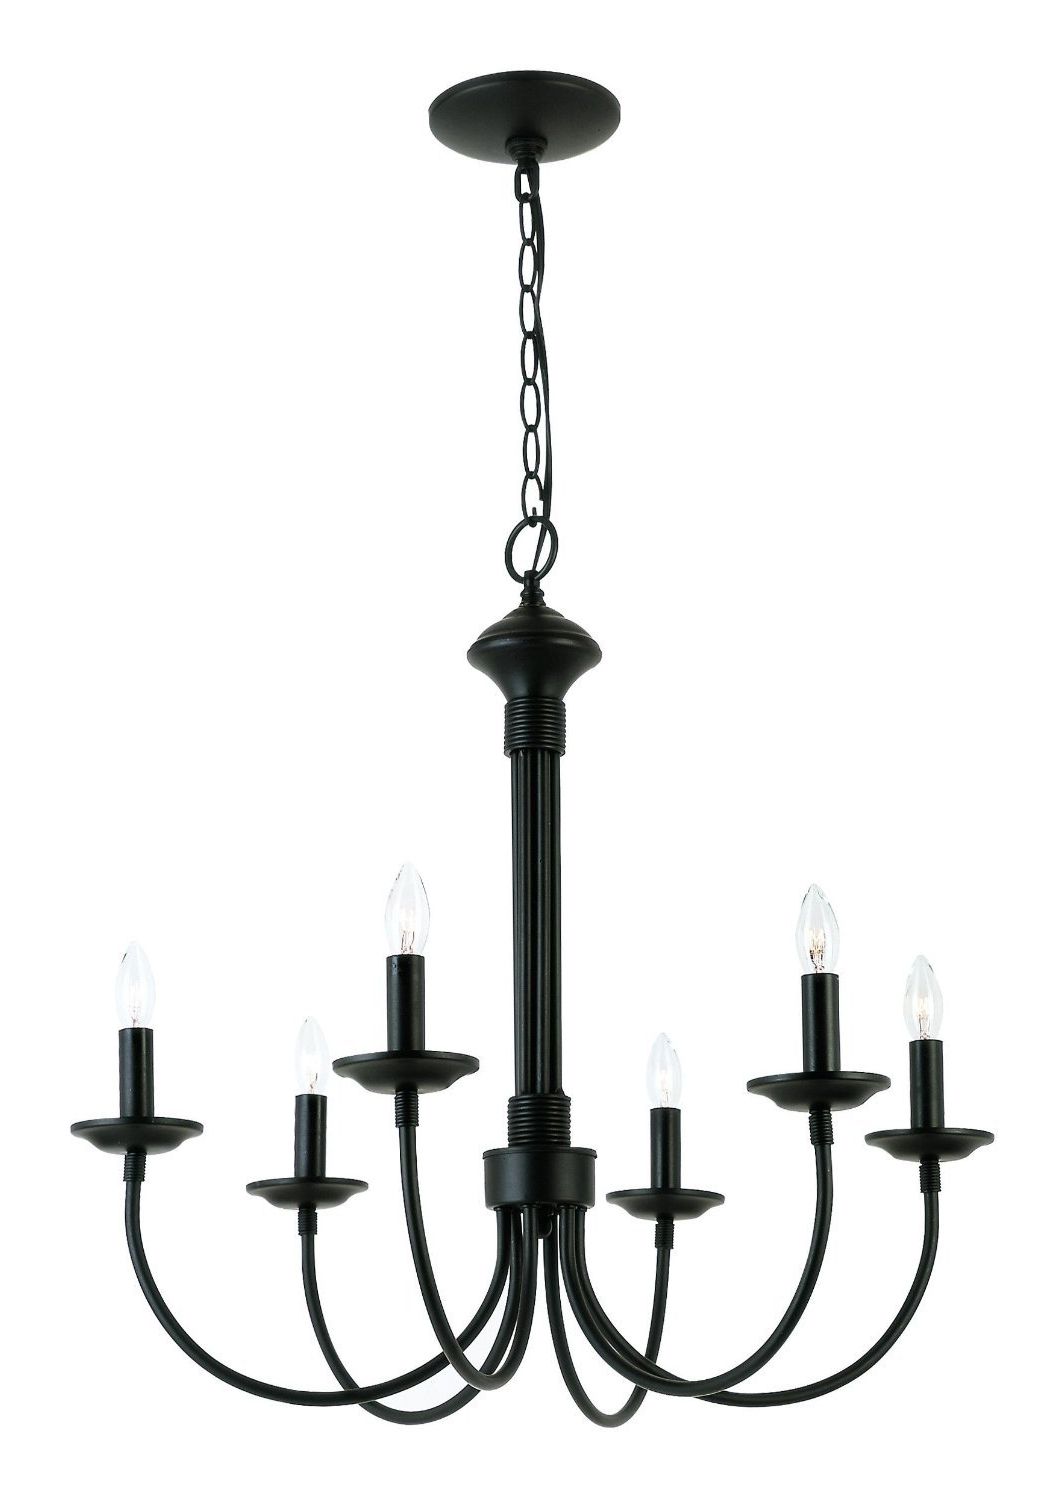 Most Popular Shaylee 5 Light Candle Style Chandeliers With Regard To Shaylee 6 Light Candle Style Chandelier (View 4 of 25)